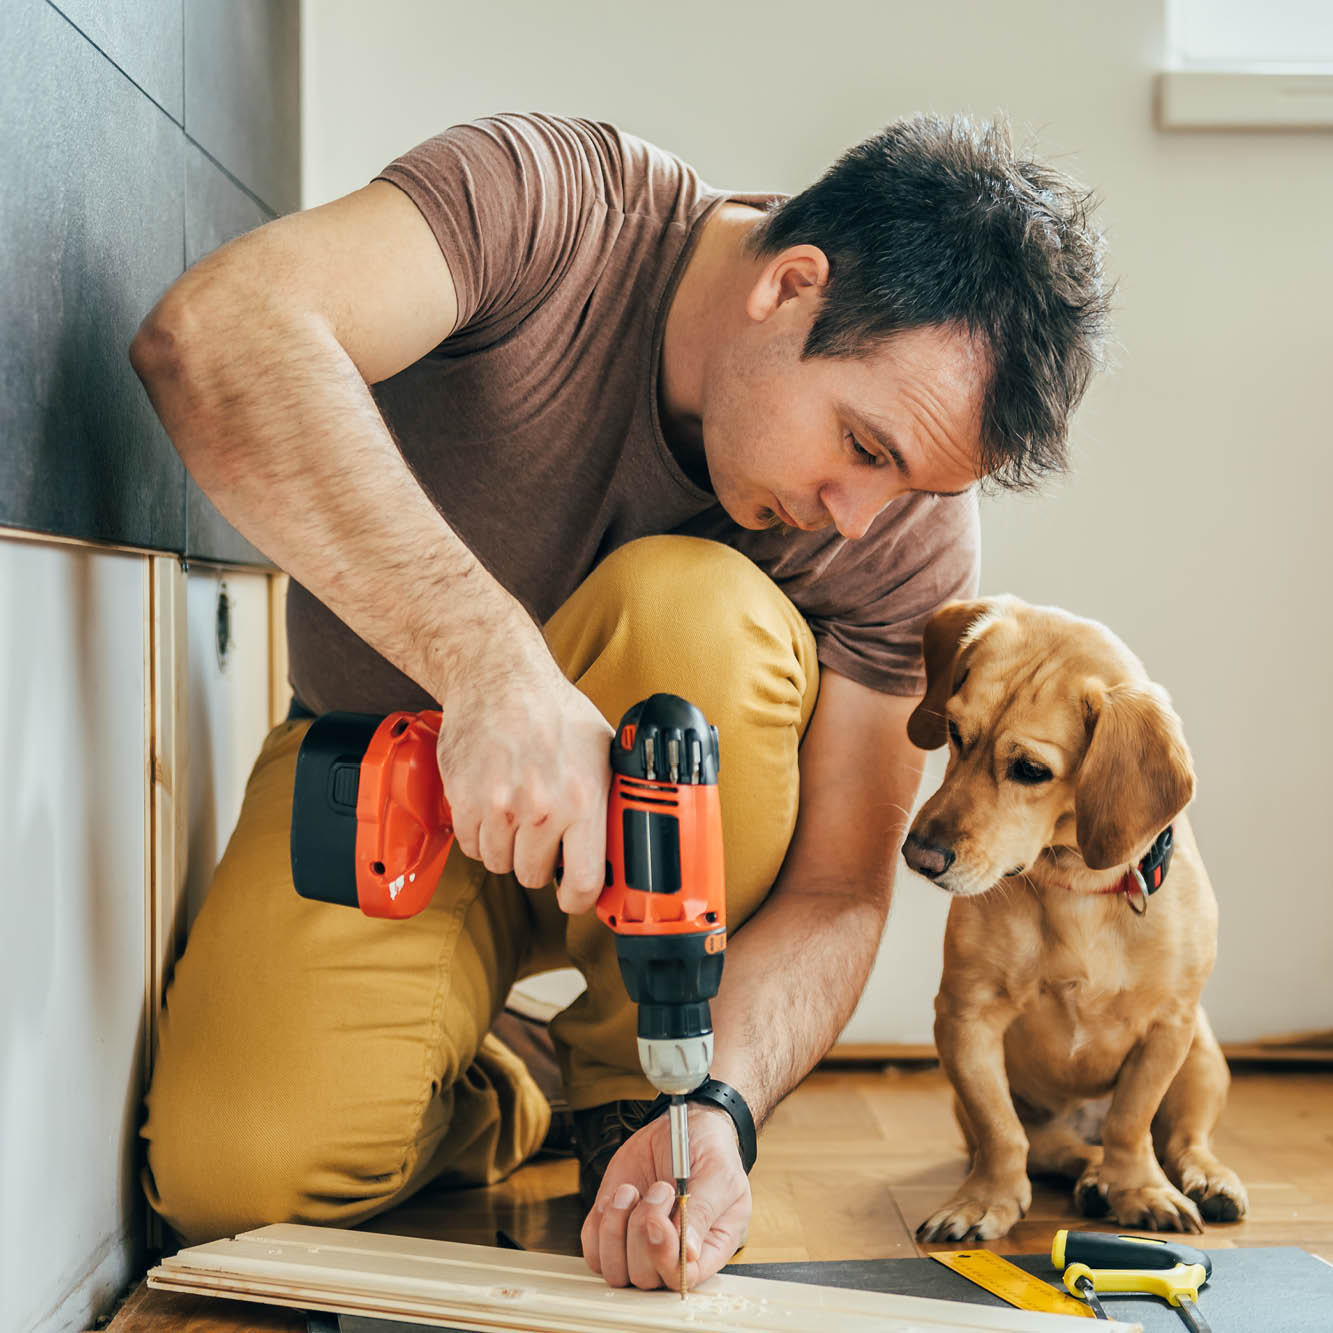 Man with electric drill and puppy watching